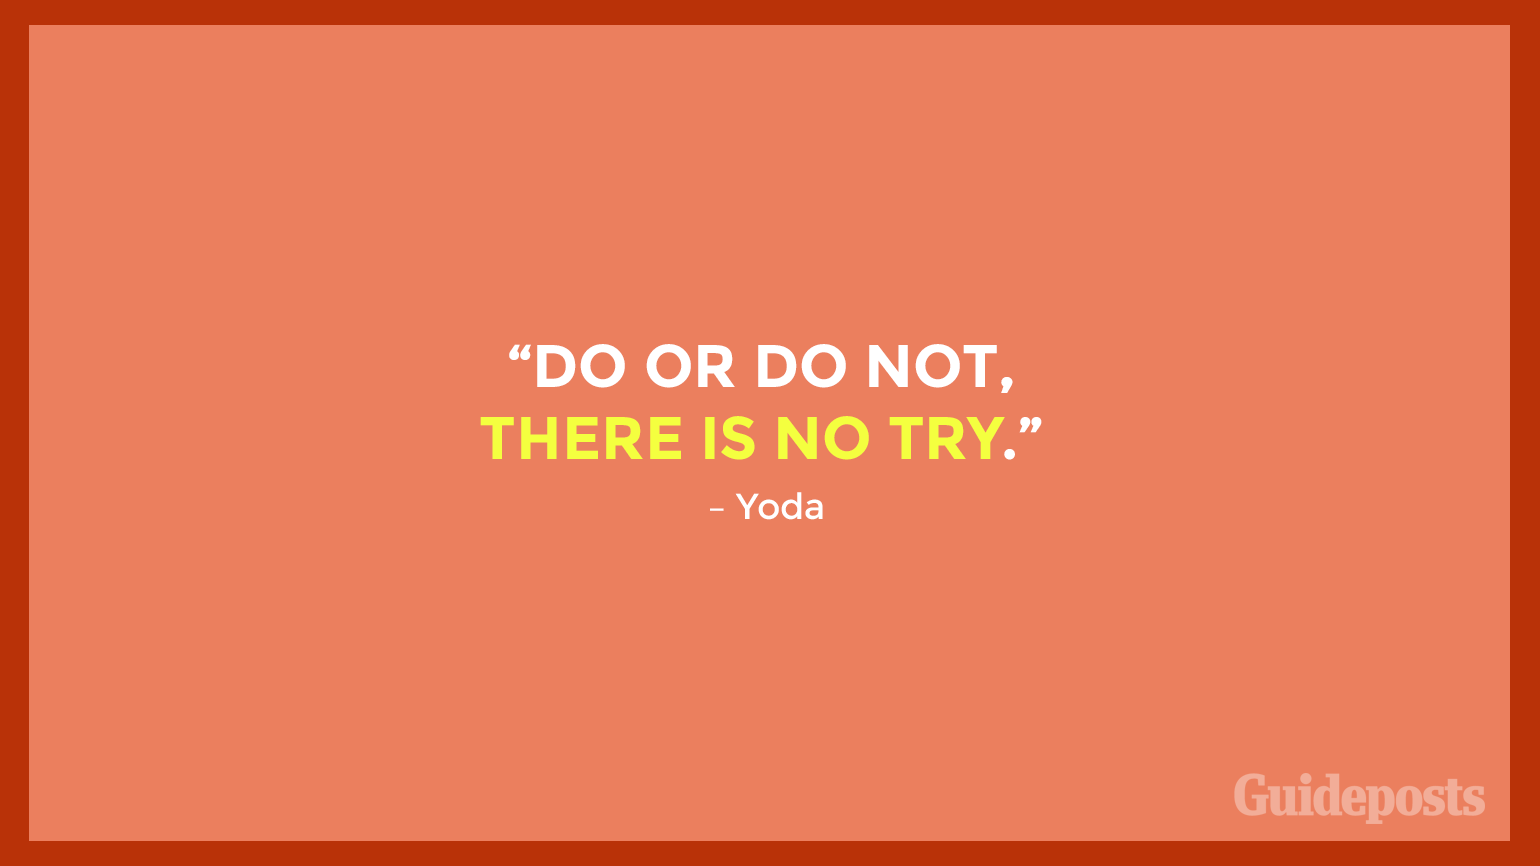 "Do or do not, there is no try.” – Yoda